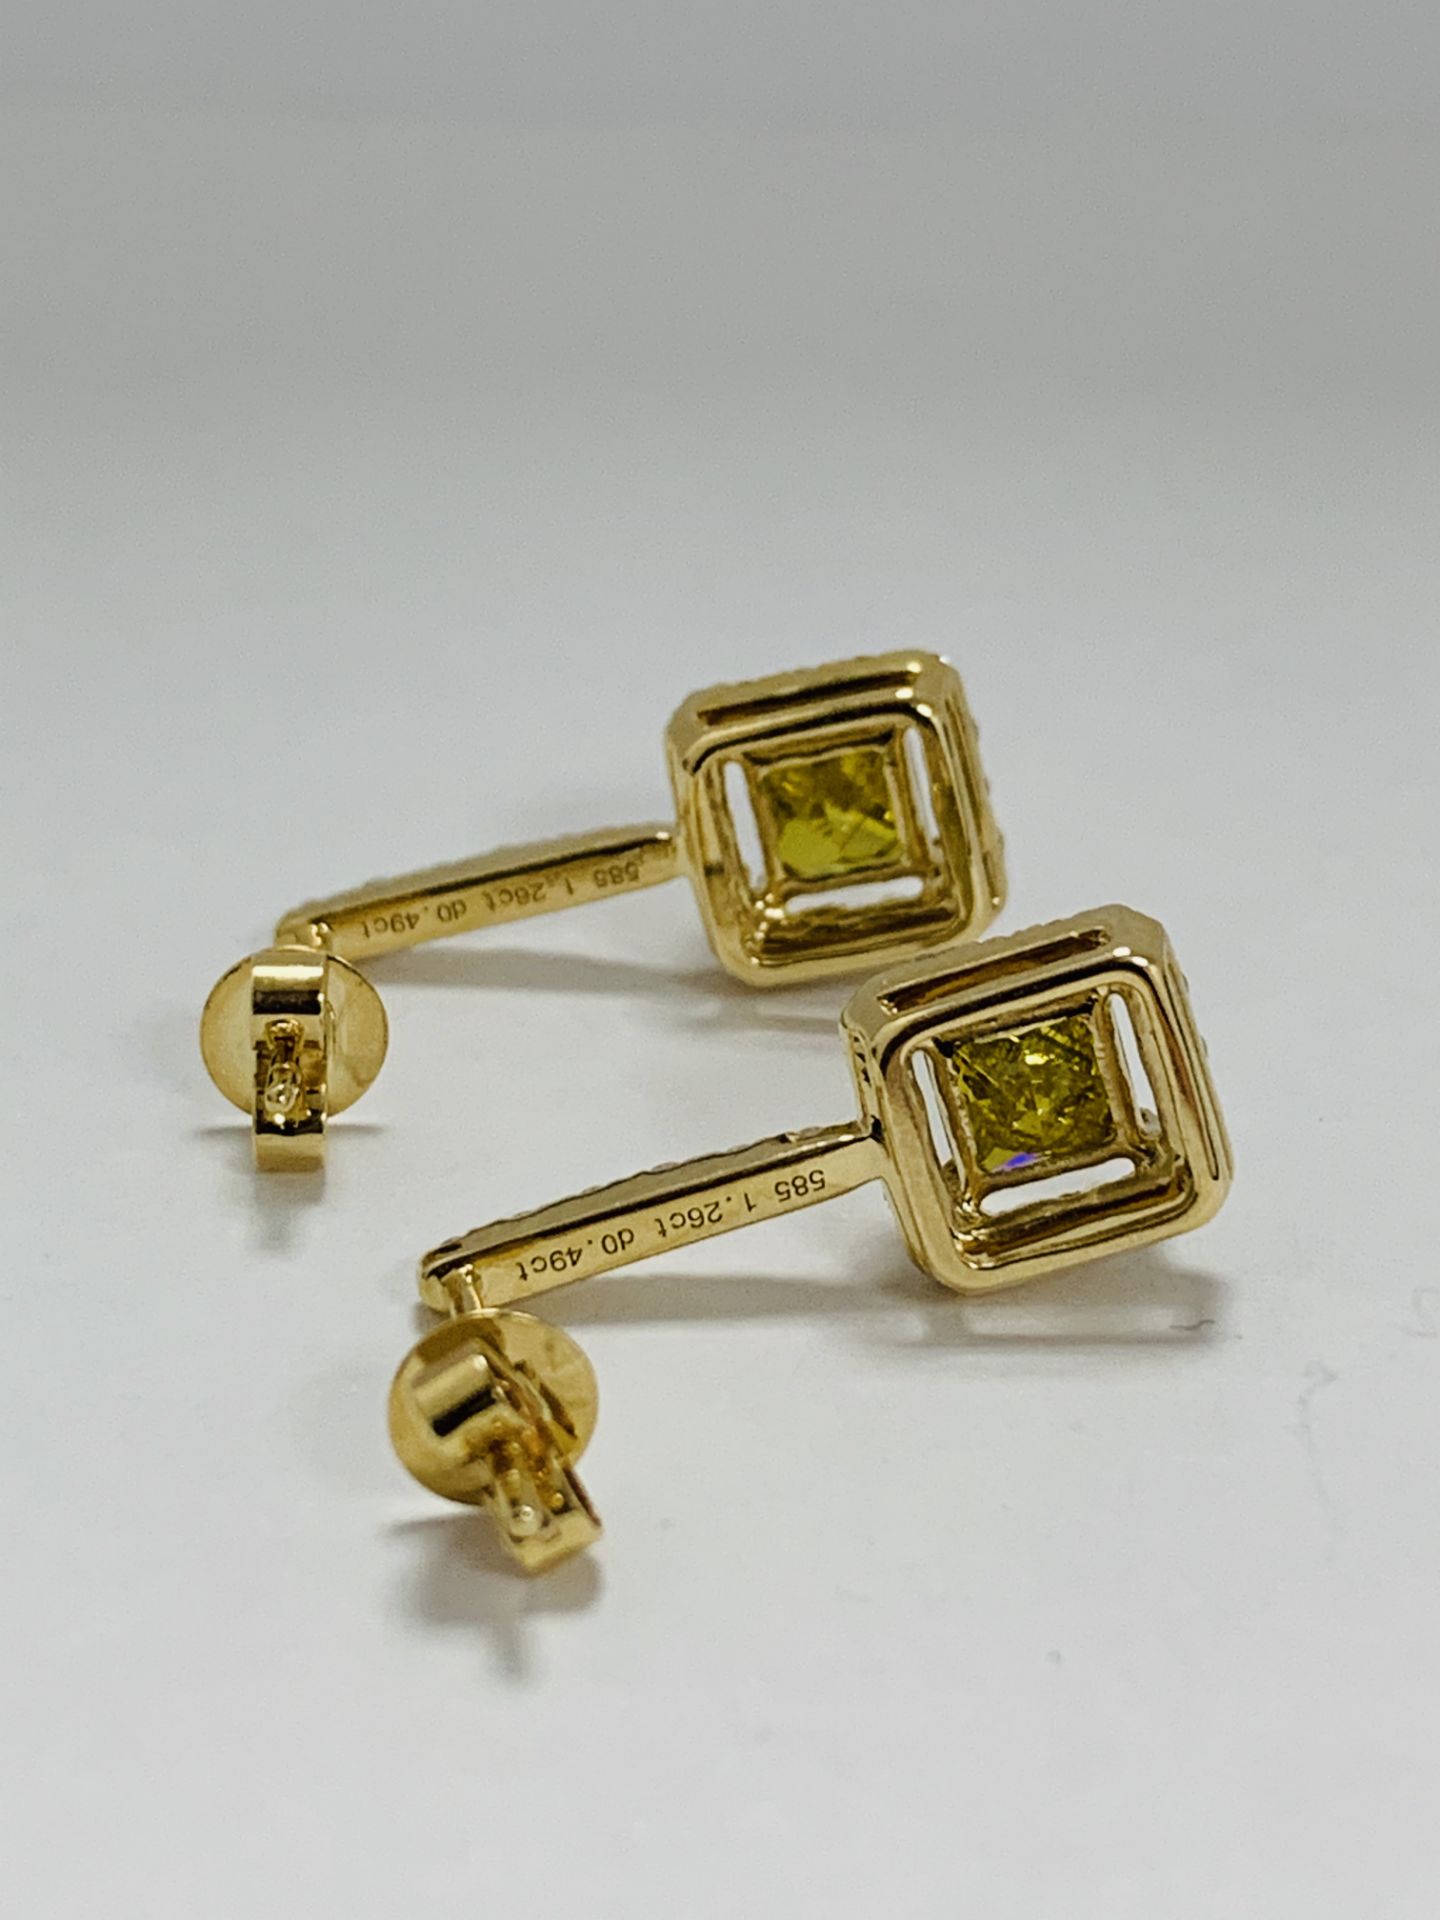 14K Yellow Gold Pair Of Earrings - Image 7 of 11